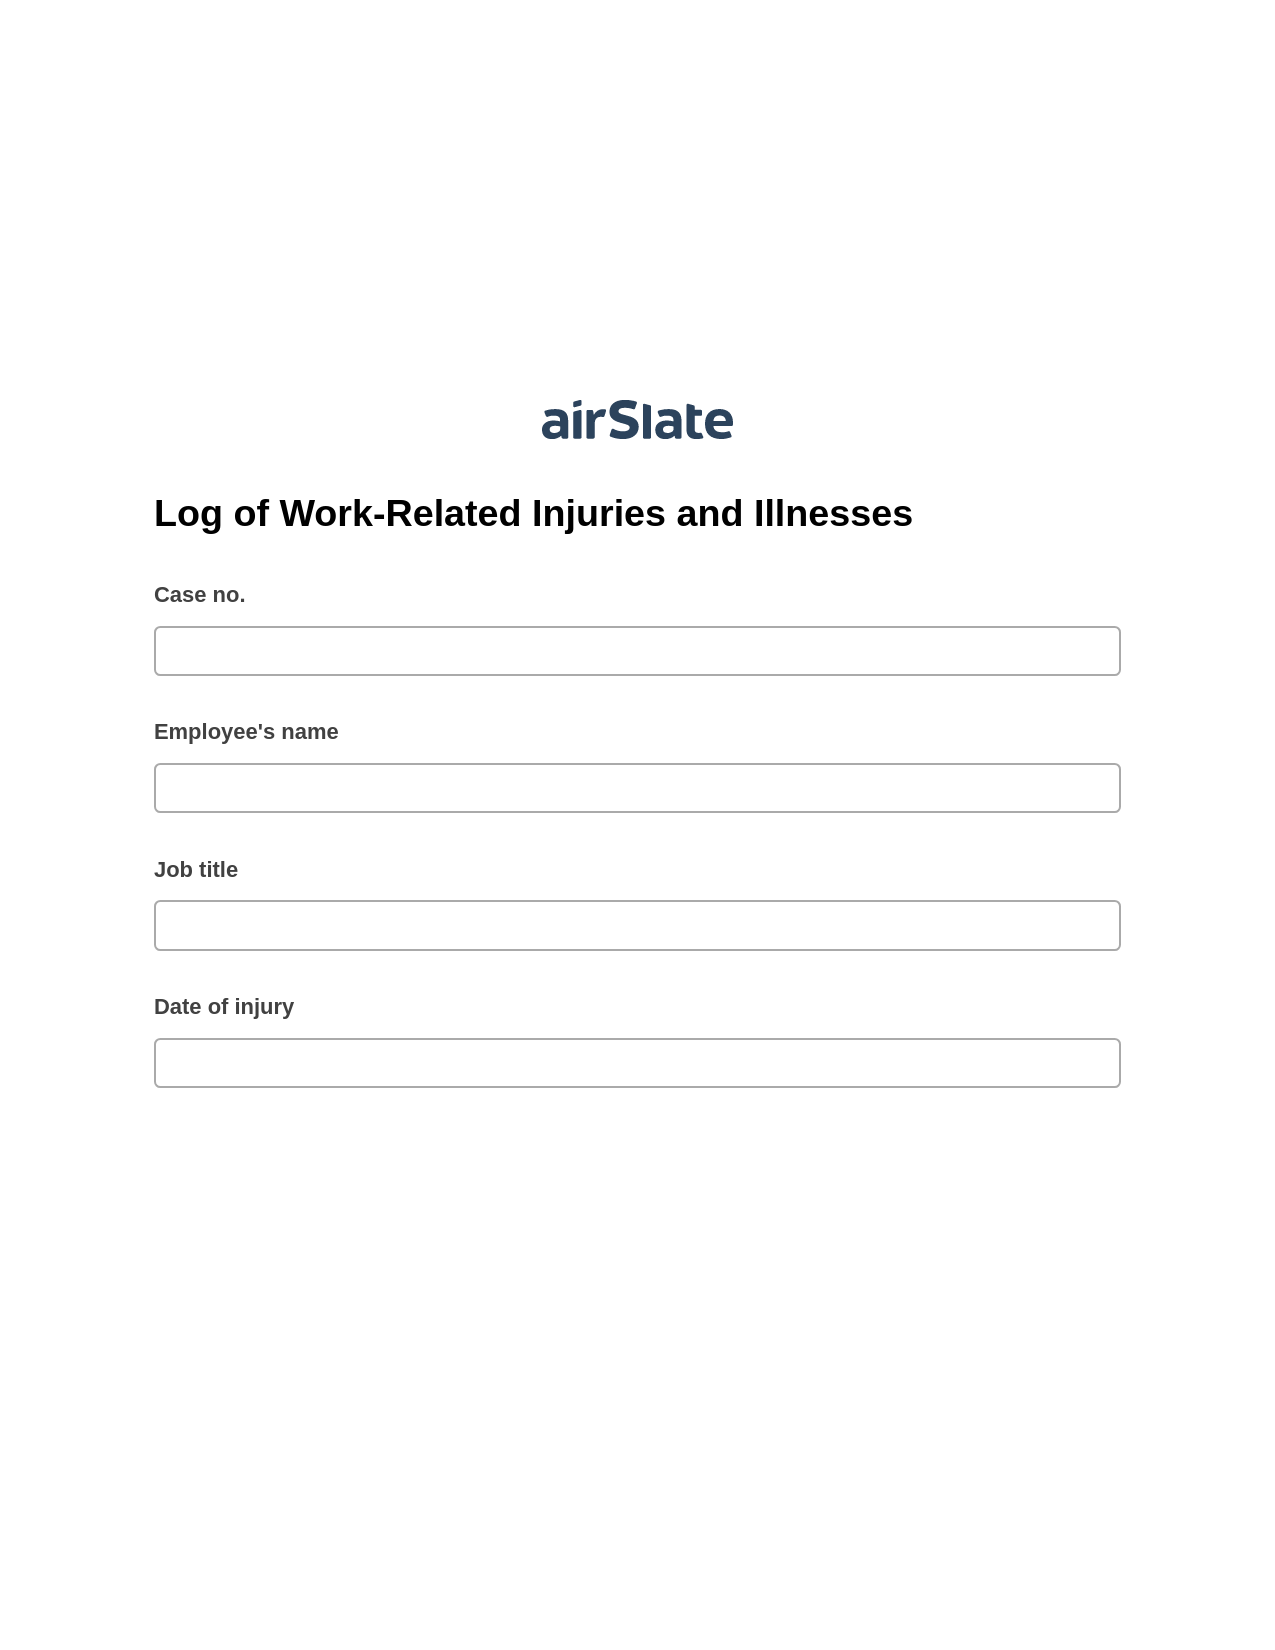 Log of Work-Related Injuries and Illnesses Pre-fill from Excel Spreadsheet Dropdown Options Bot, Lock the slate bot, Export to Formstack Documents Bot